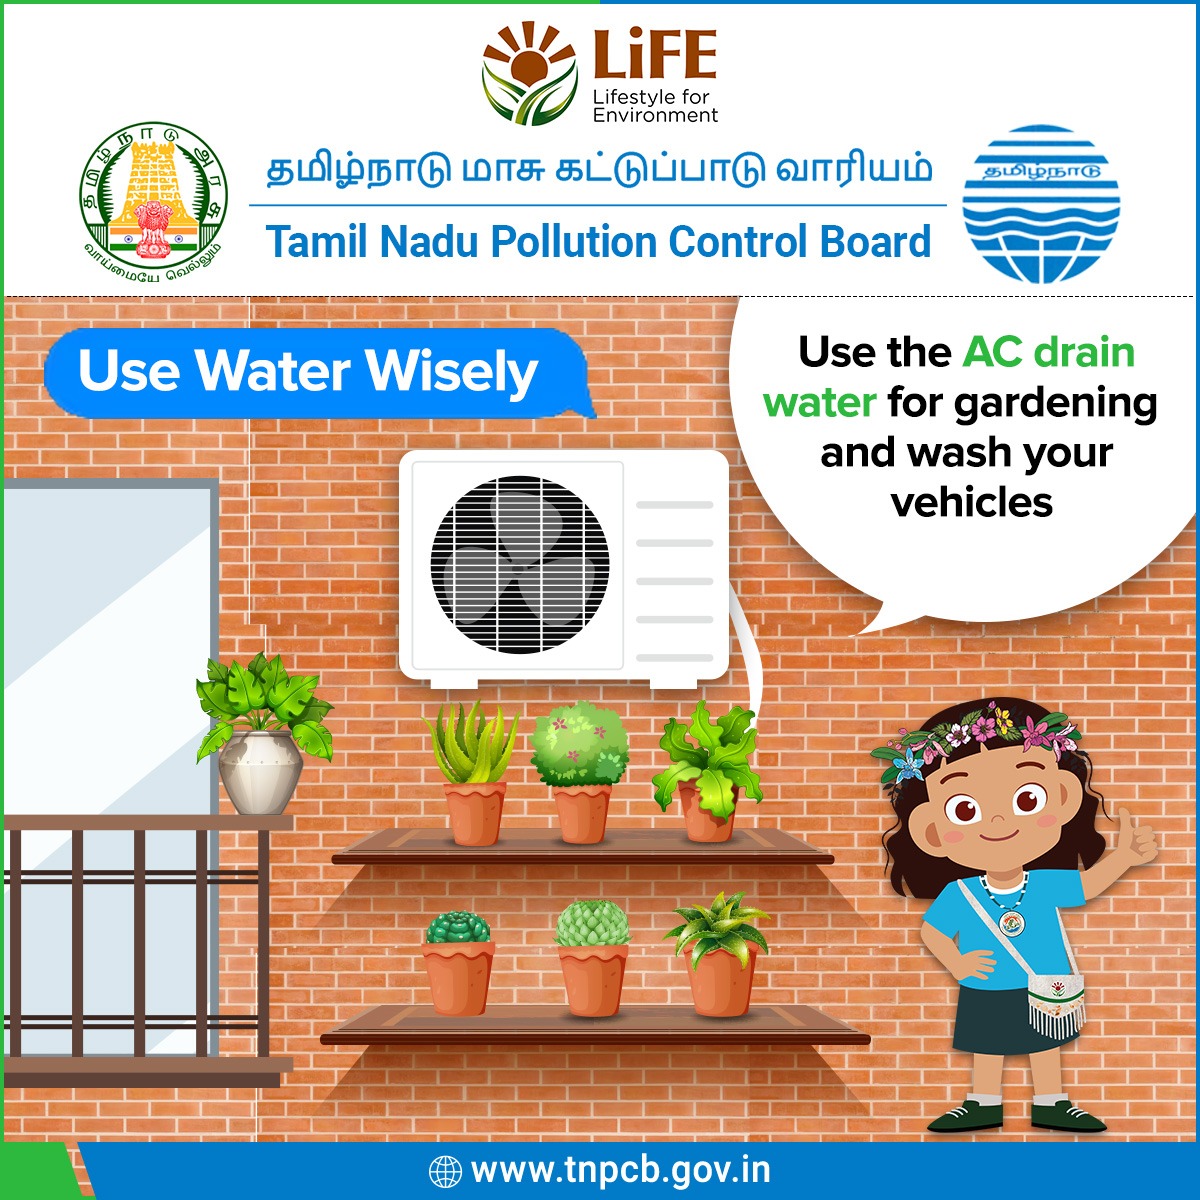 Conserve Water Creatively!

Use the AC drain water for gardening and wash your vehicles. Small actions, Big impact. Let's make every drop count!
#TamilNaduPollutionControlBoard #TNPCB 
#PollutionControl #Ecotips #TNPCBEcotips #ProtectEnvironment  #WaterConservation #SmartWaterUse